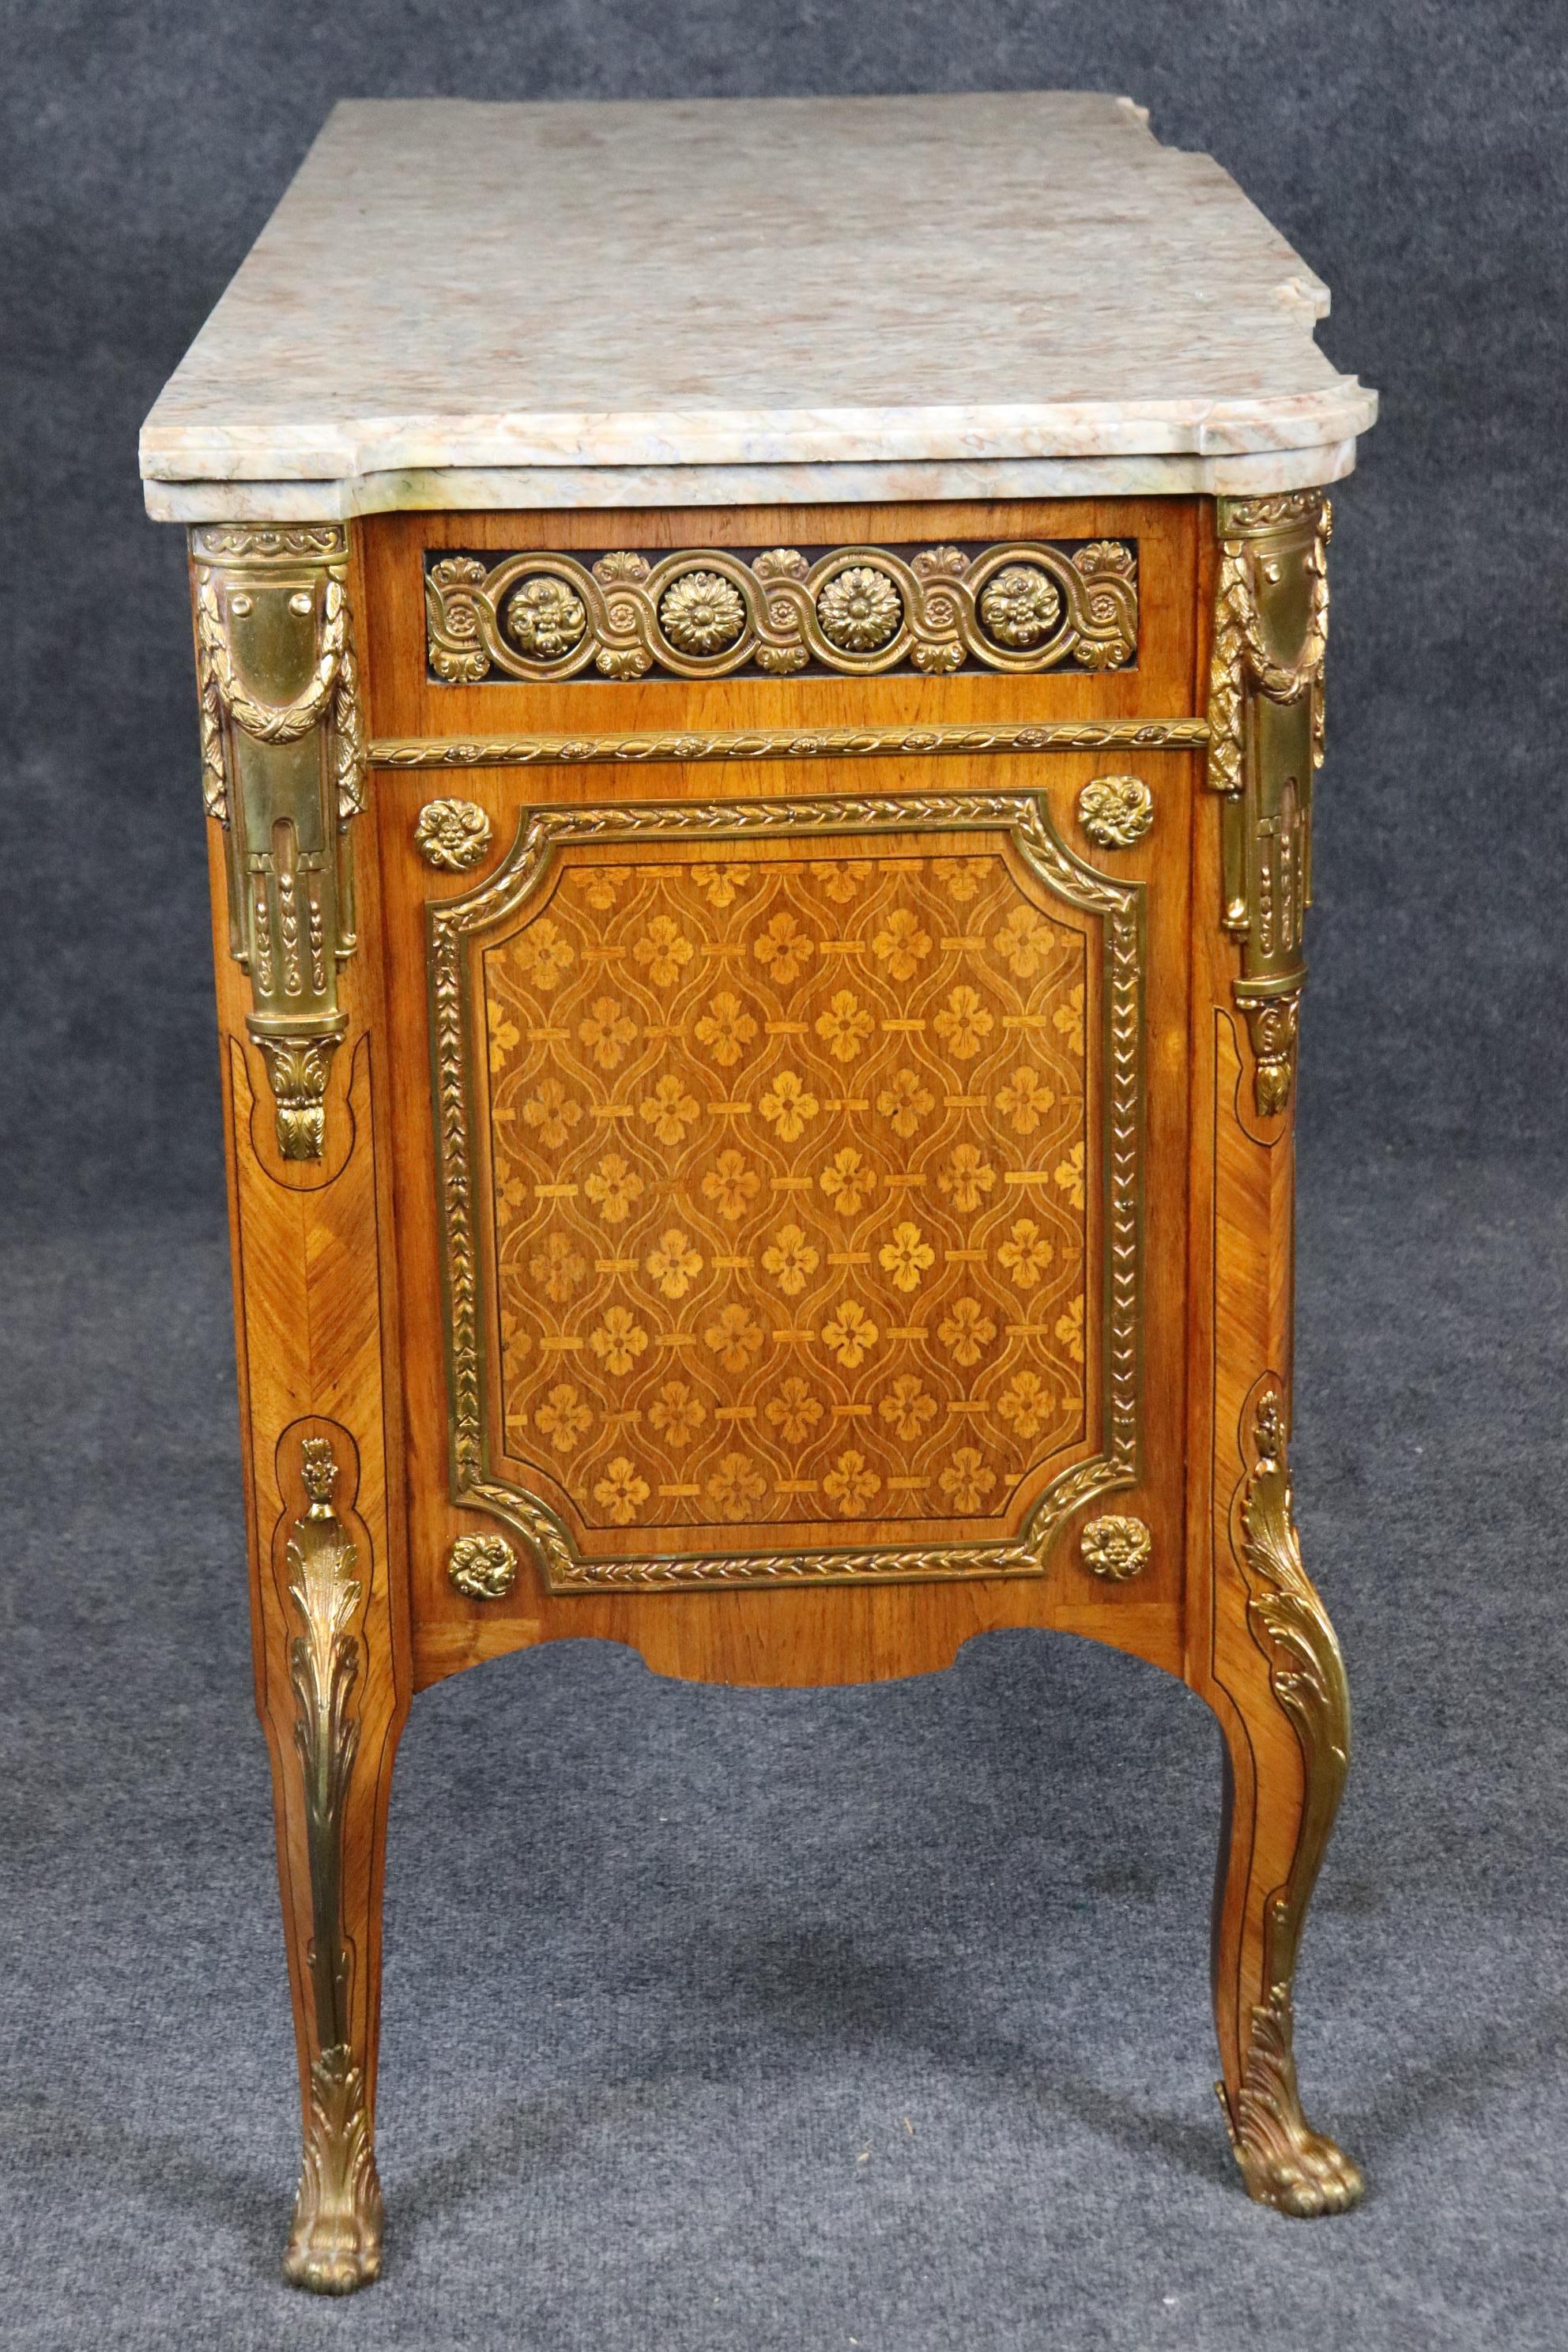 This is a superbly crafted French-made commode. The commode is in good condition with minor signs of age and use. The marble top is double the thickness of most marble tops and is in good condition. The case is satinwood inlaid and walnut with